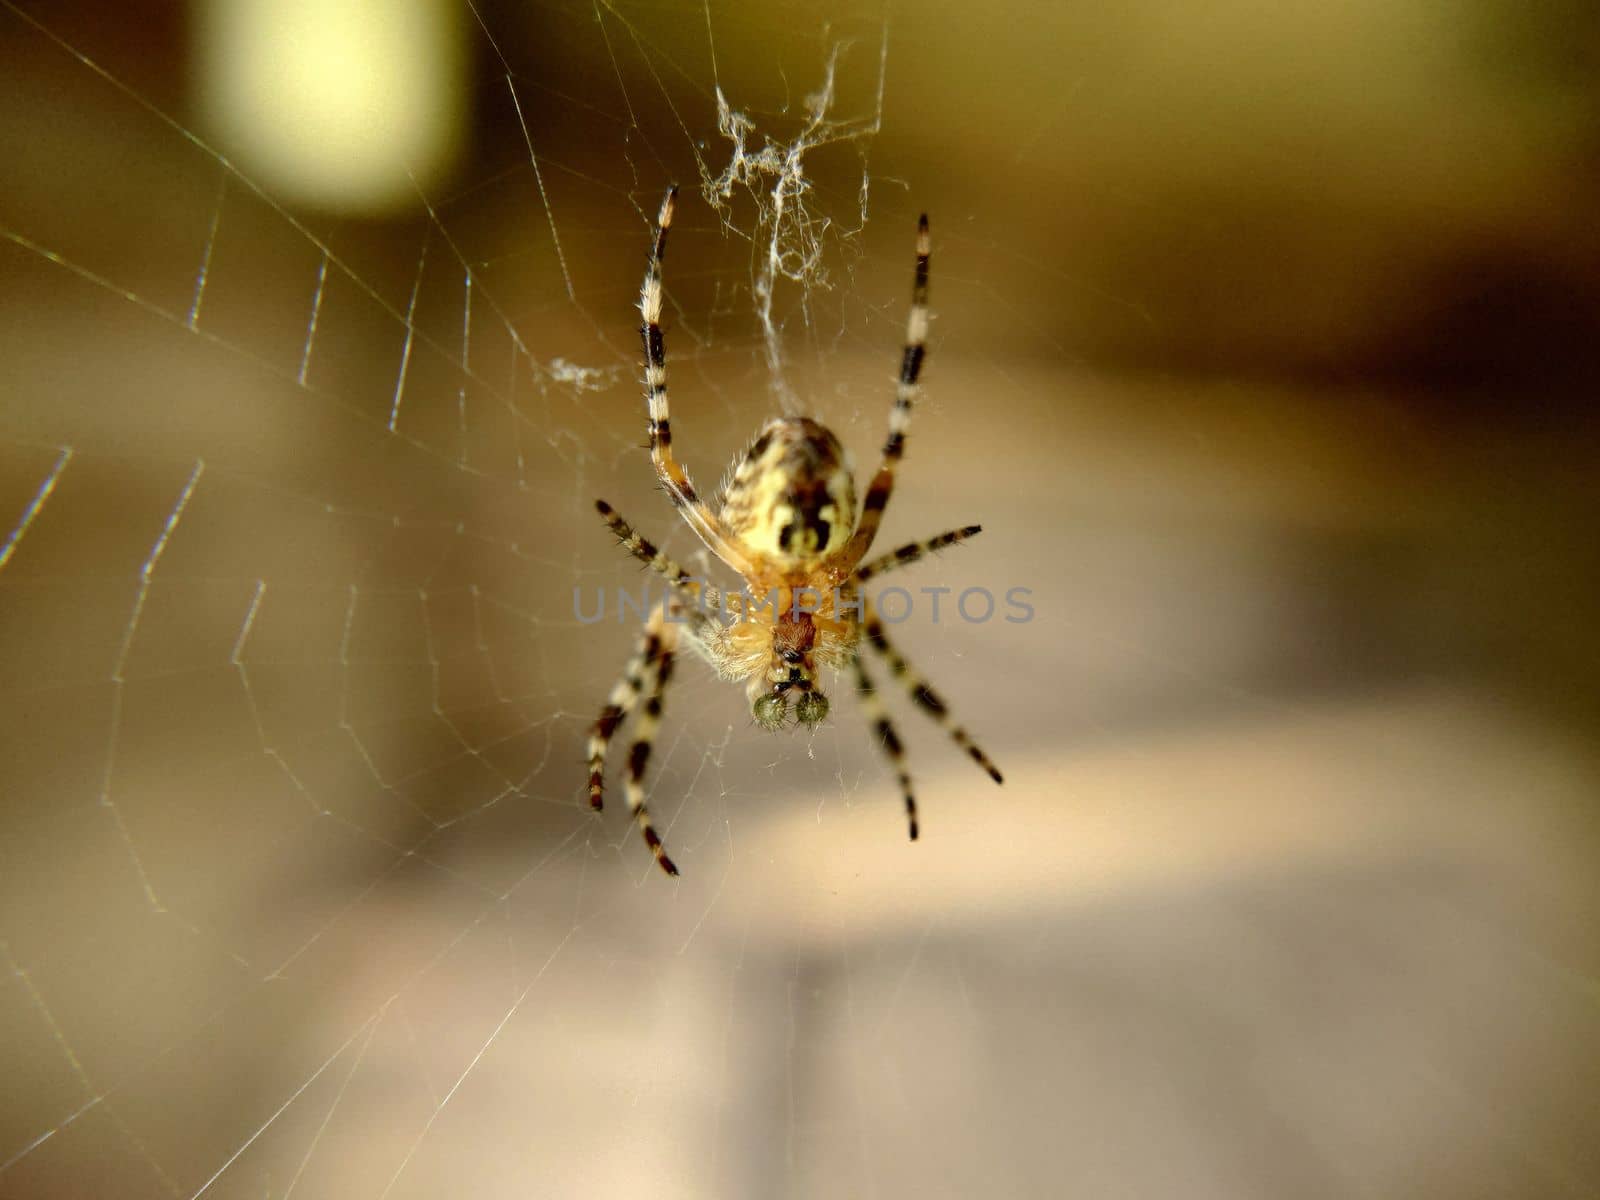 A striped spider with green eyes hanging on a web.Macrophotography.Texture or background.Selective focus.